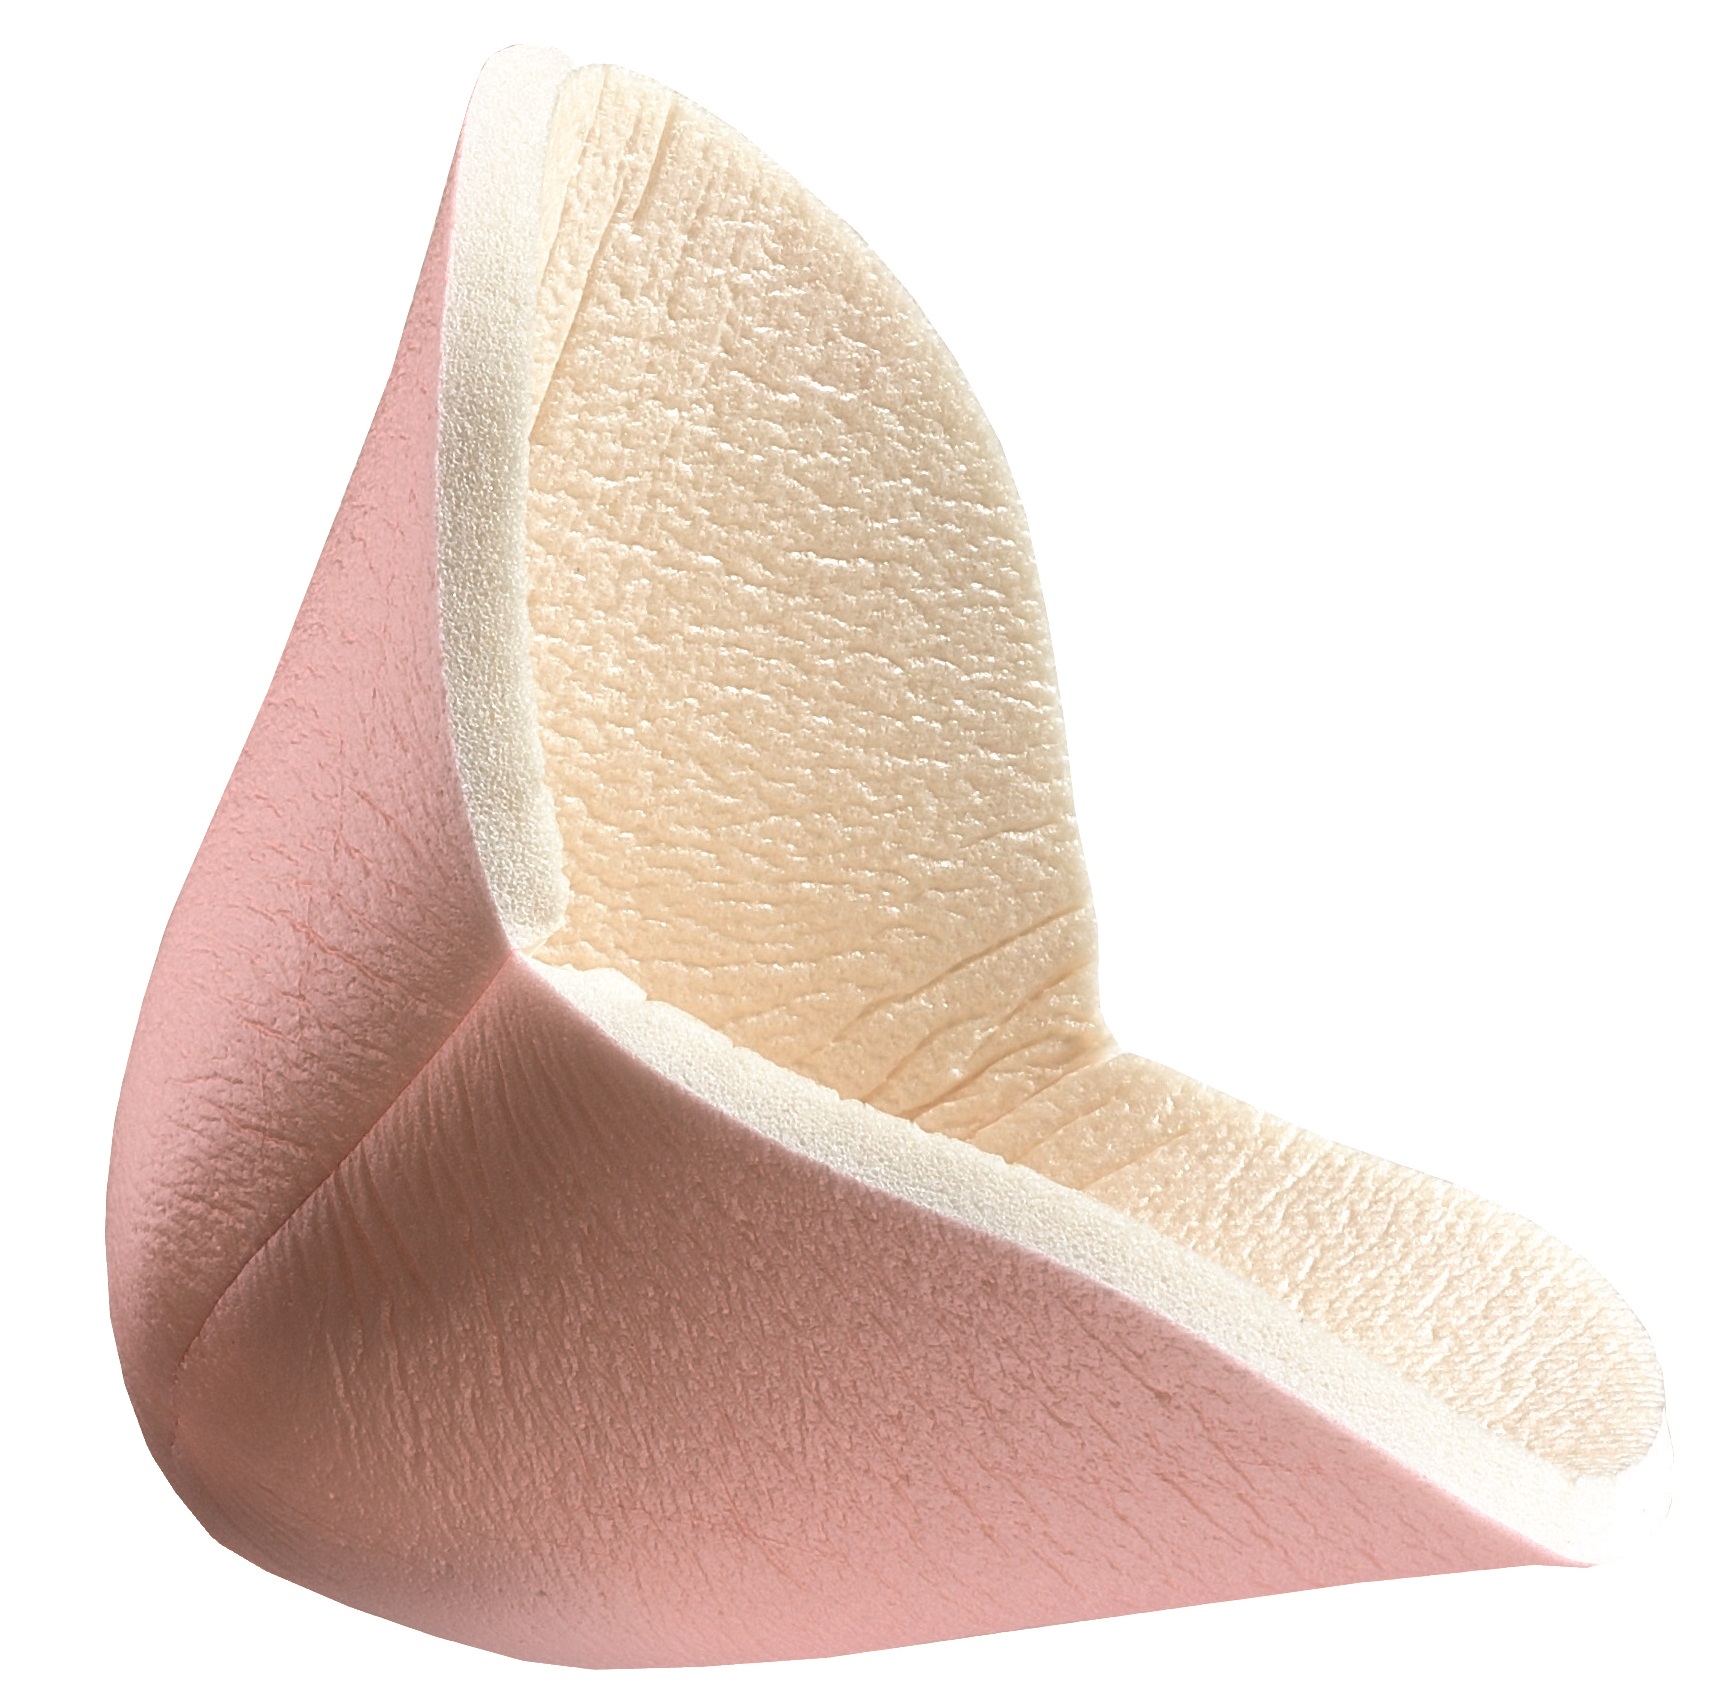 Allevyn Non-Adhesive Dressing Heel Shaped image 0